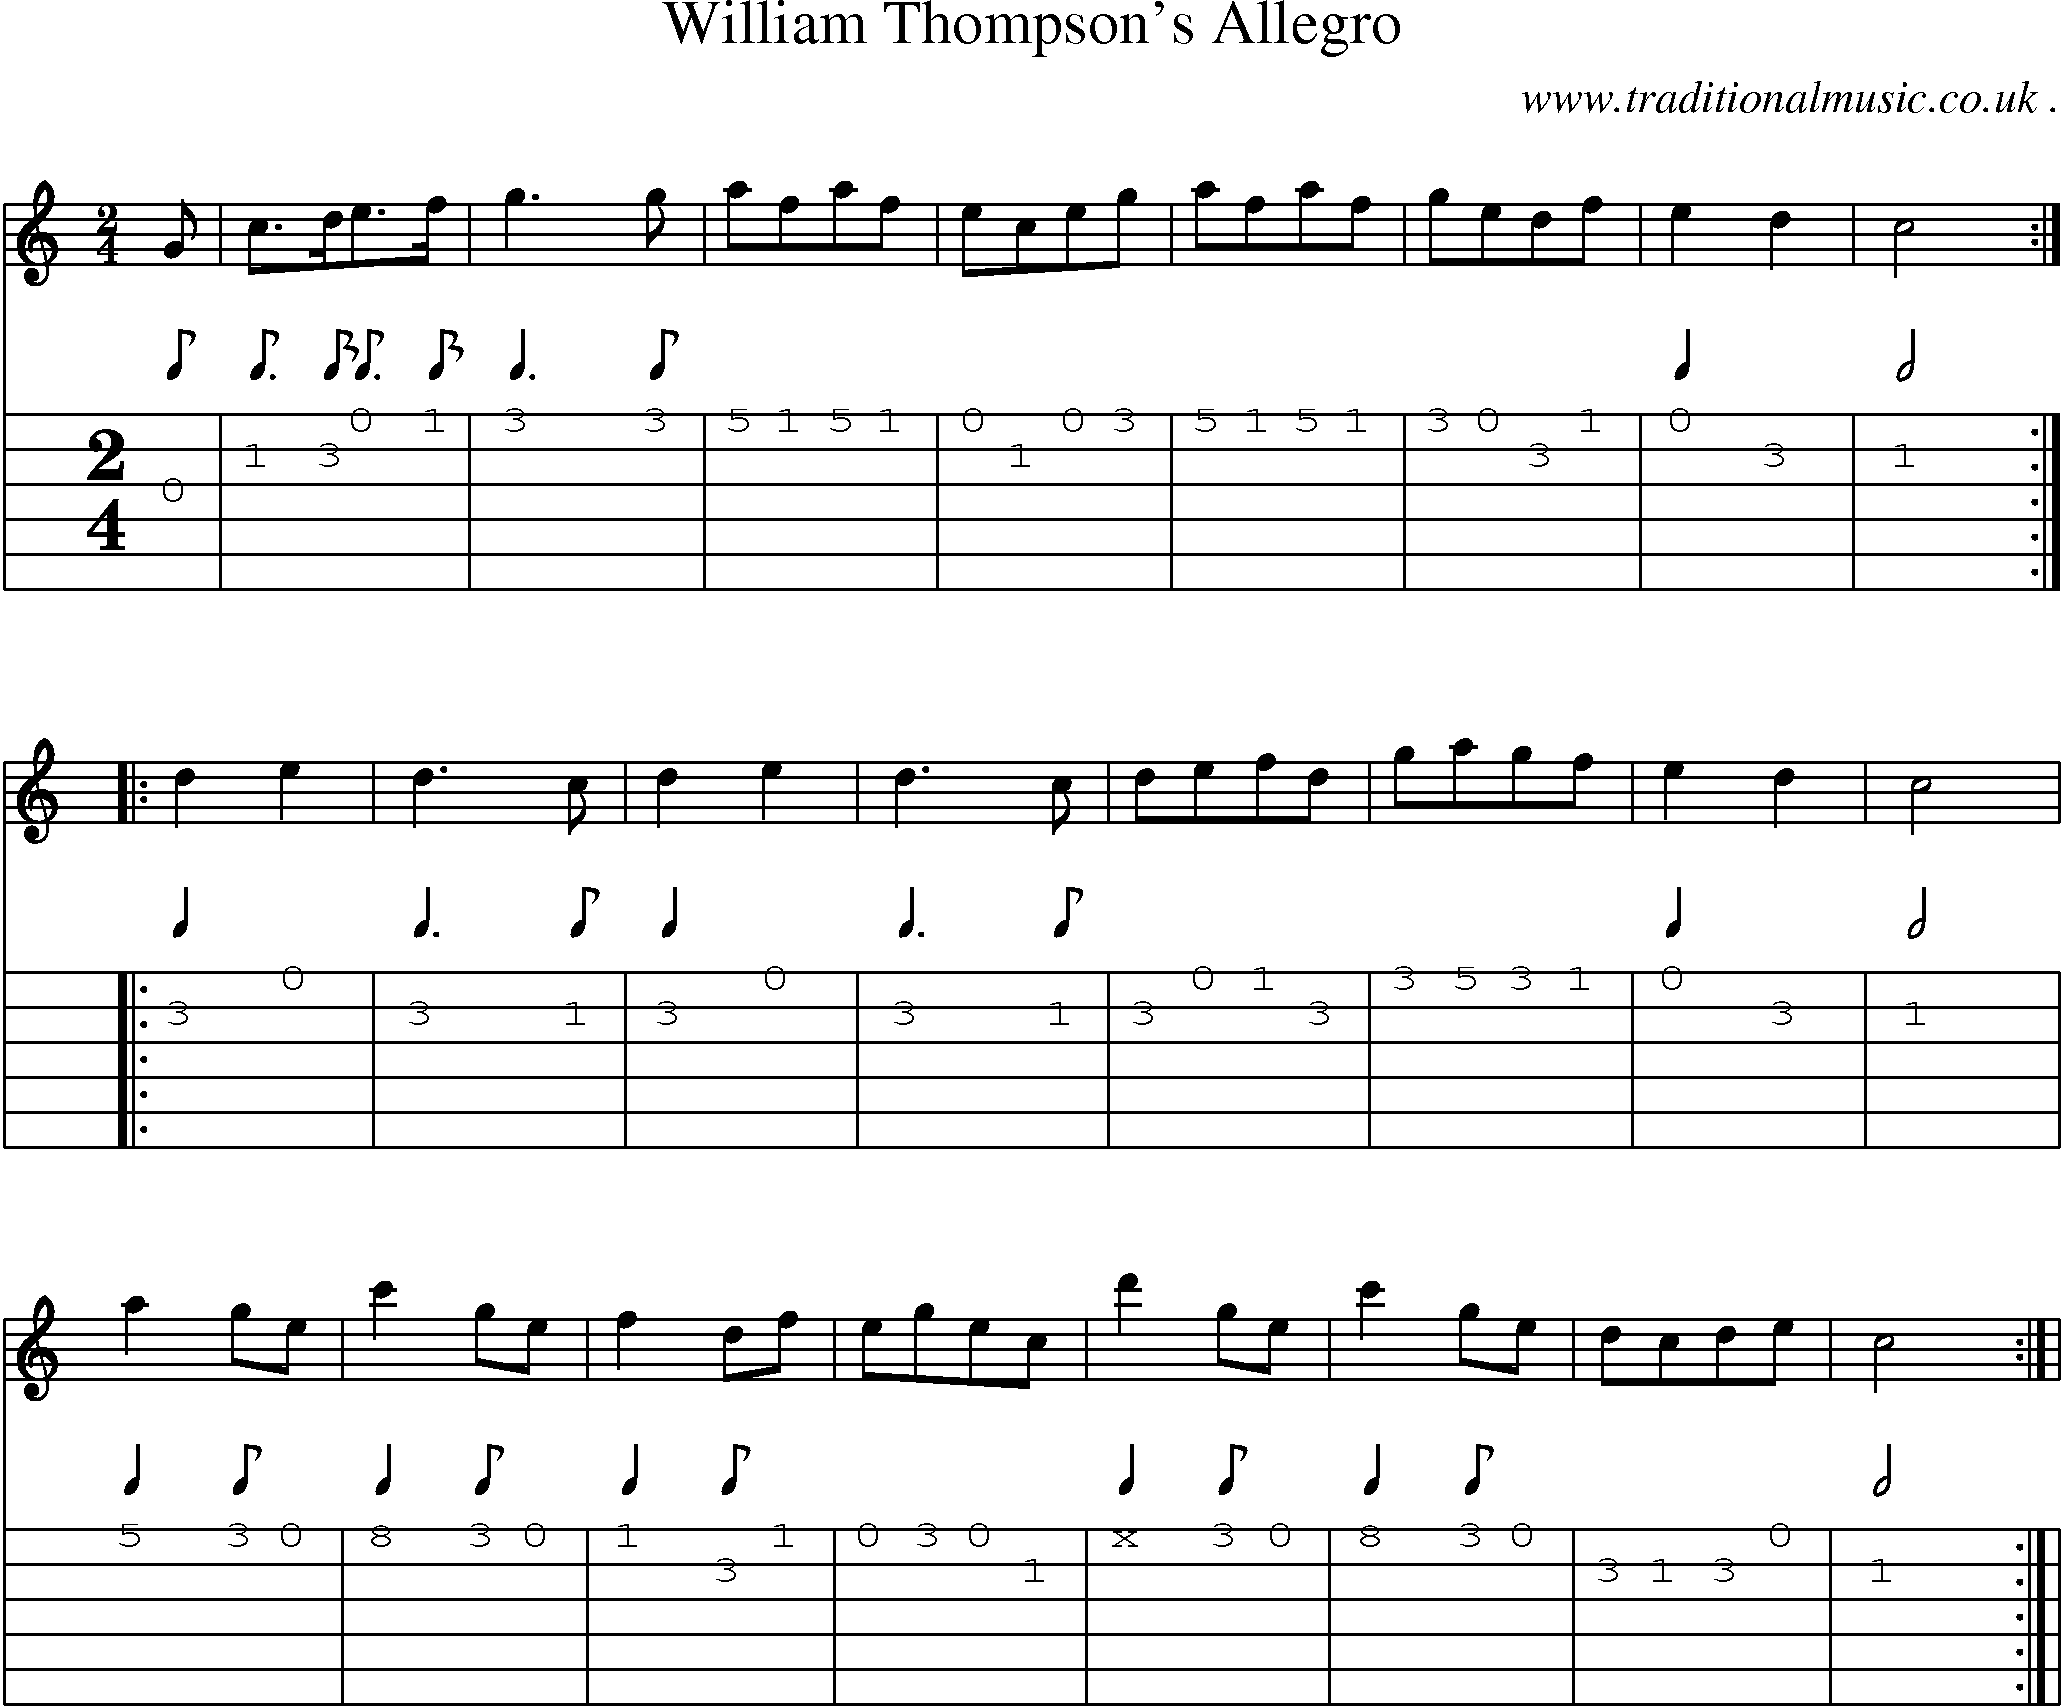 Sheet-Music and Guitar Tabs for William Thompsons Allegro